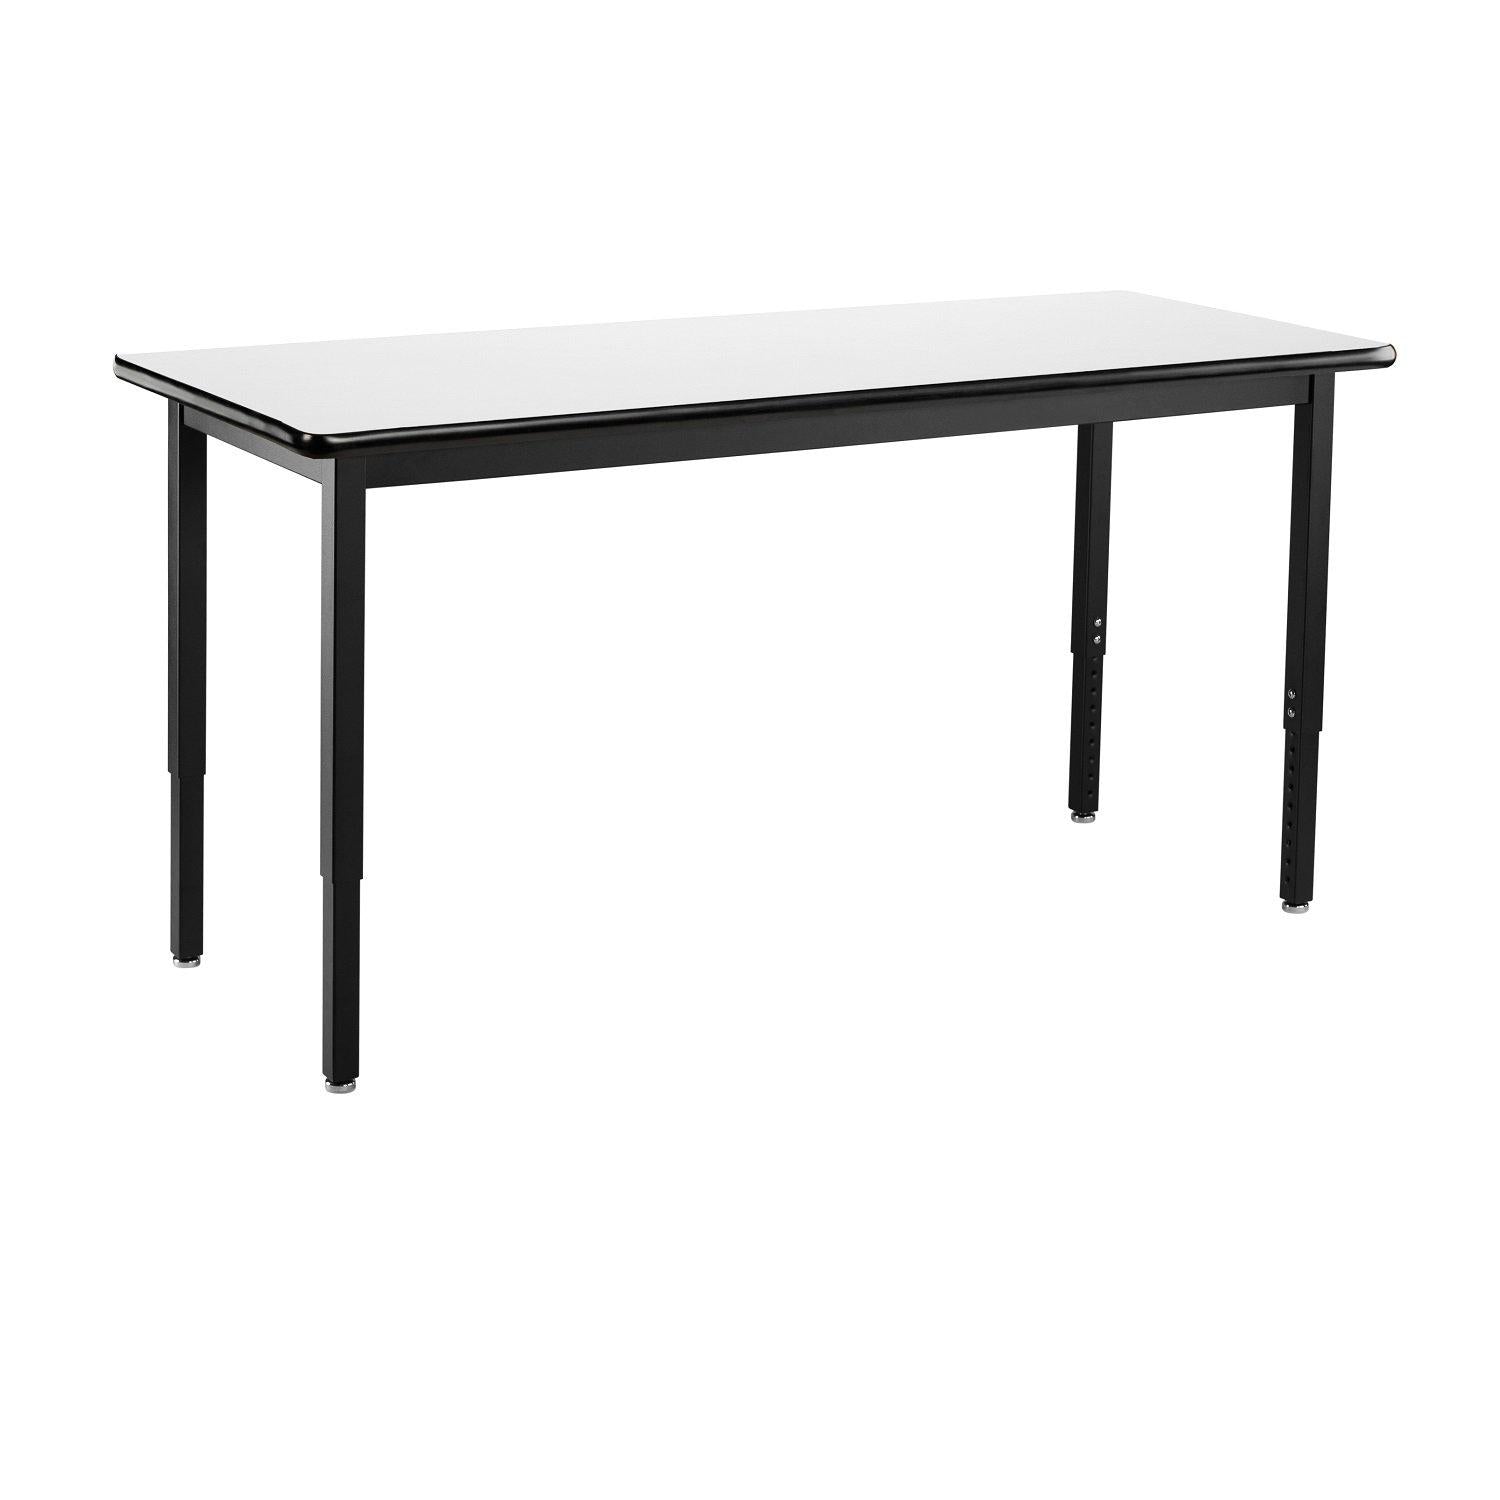 Heavy-Duty Height-Adjustable Utility Table, Black Frame, 30" x 48", Whiteboard High-Pressure Laminate Top